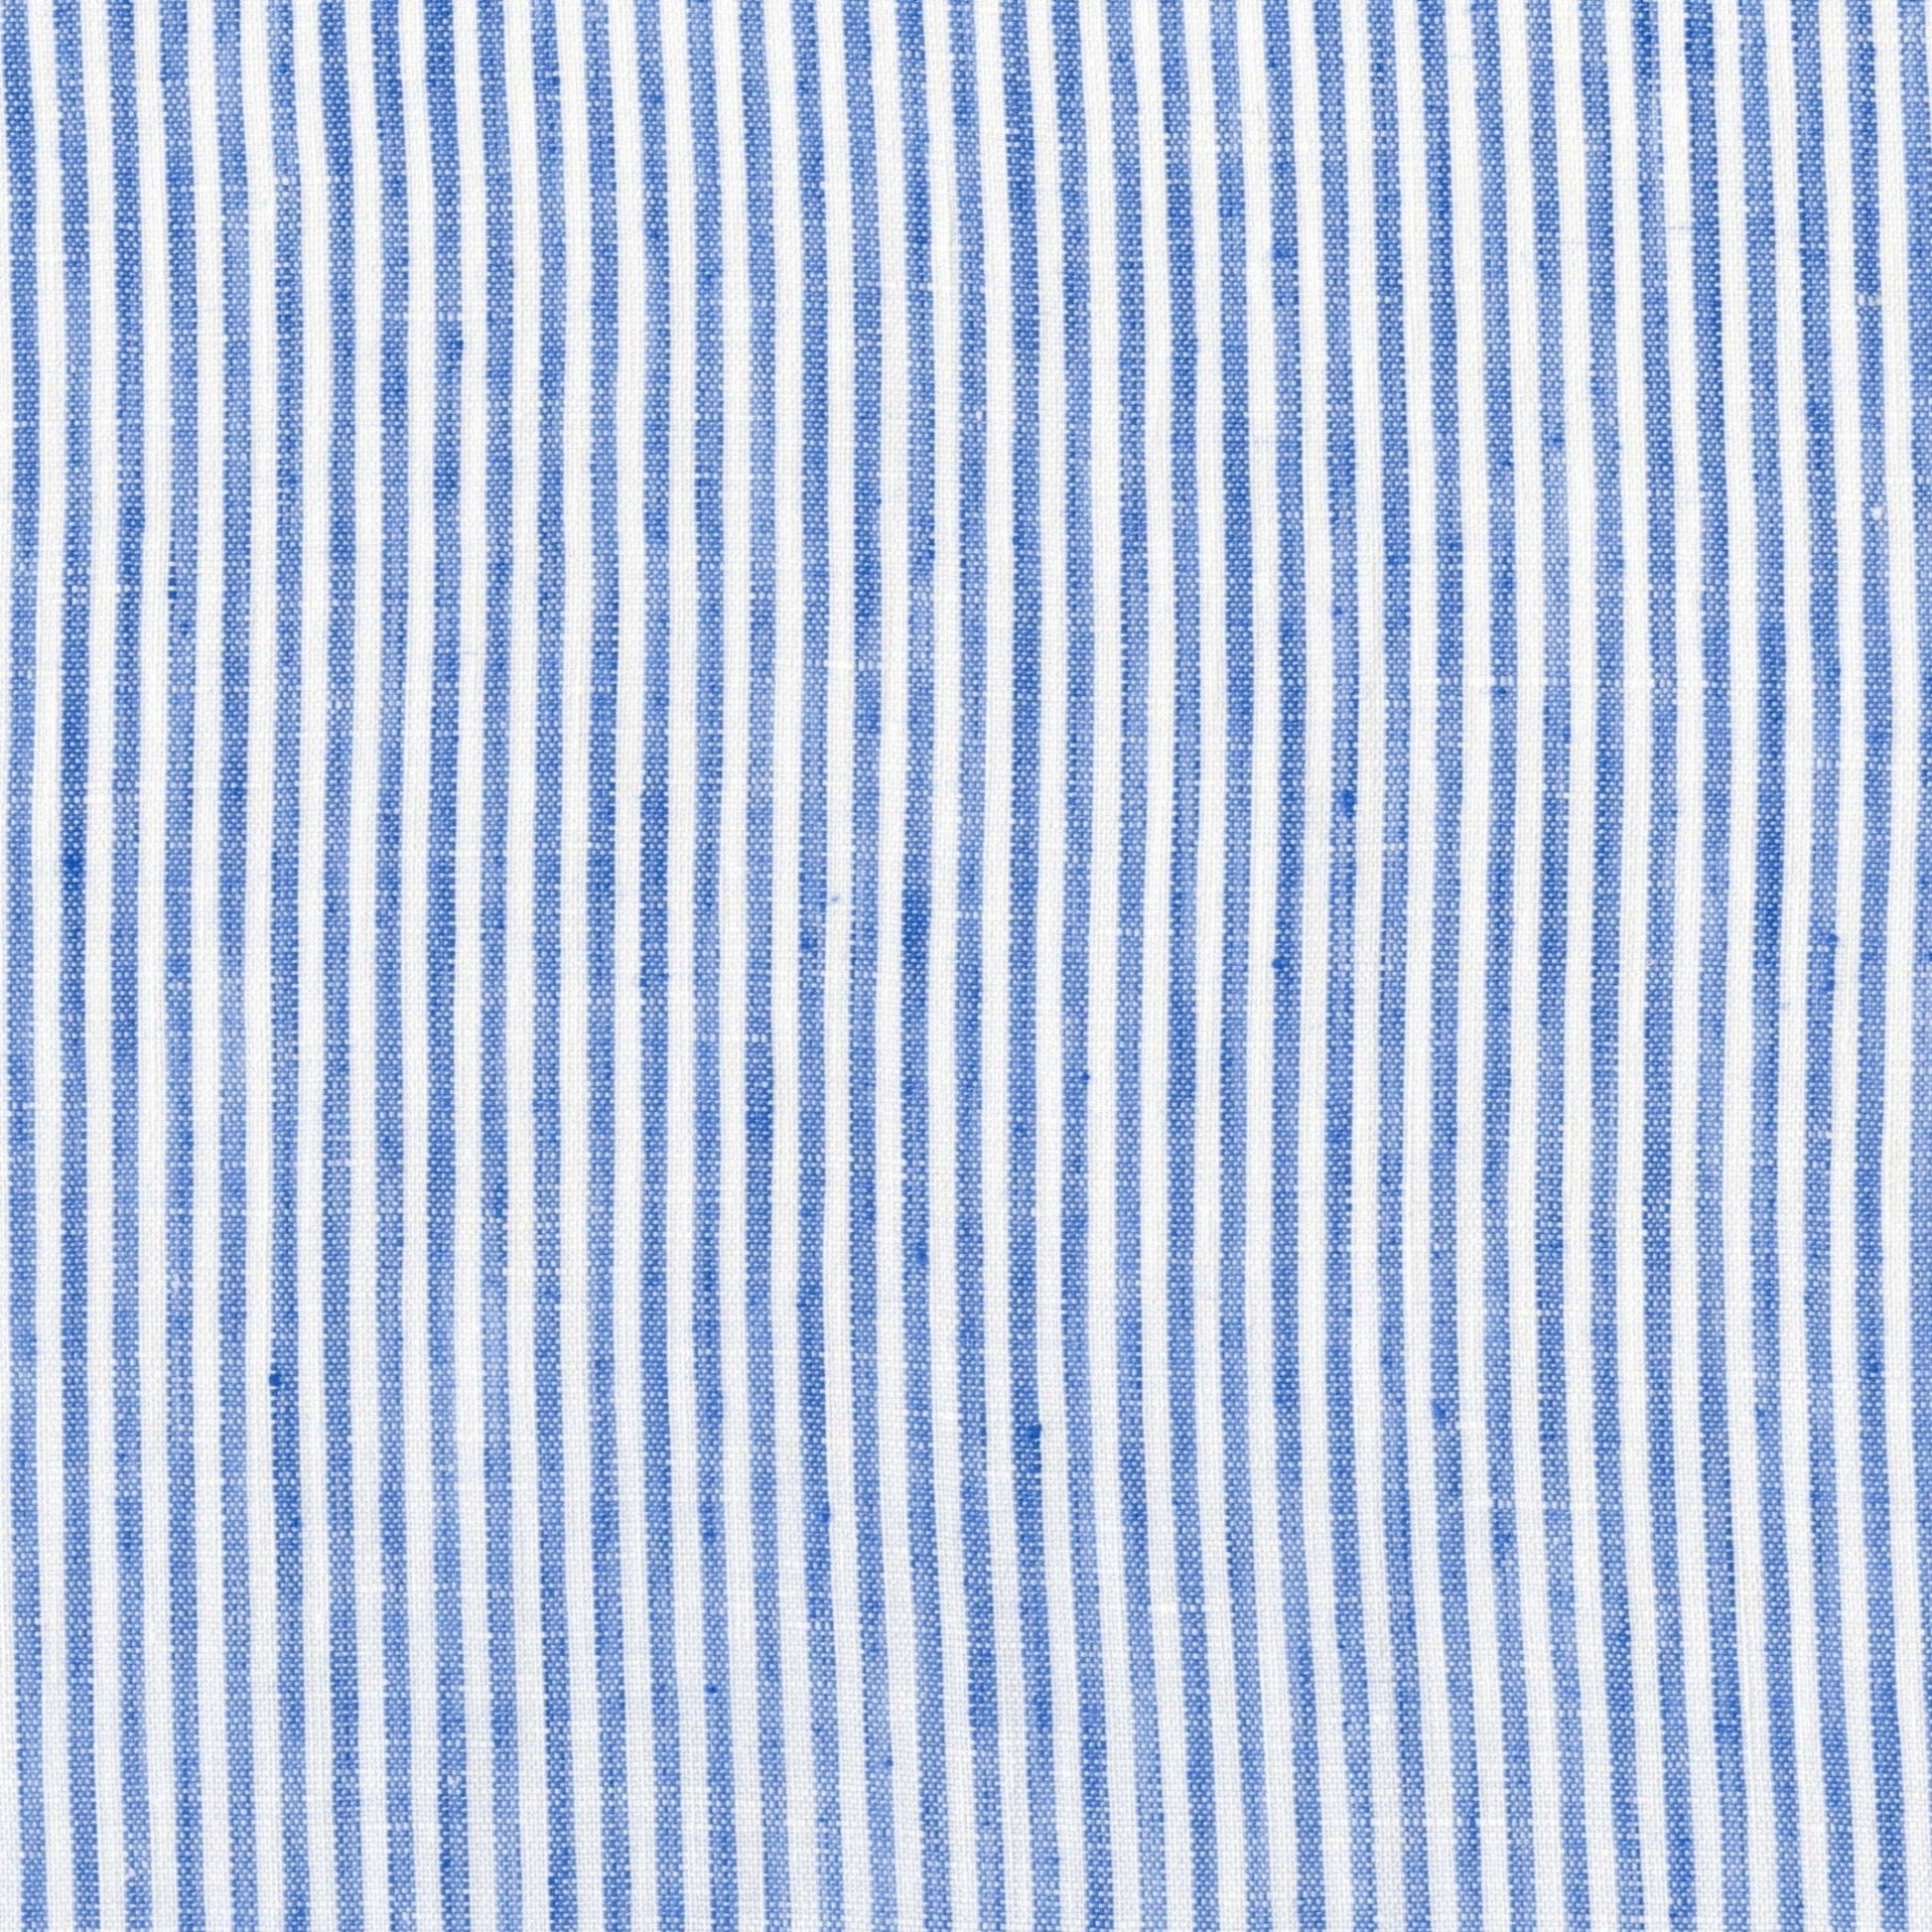 Cabo Stripe Linen Swatch - New Arrivals Inc